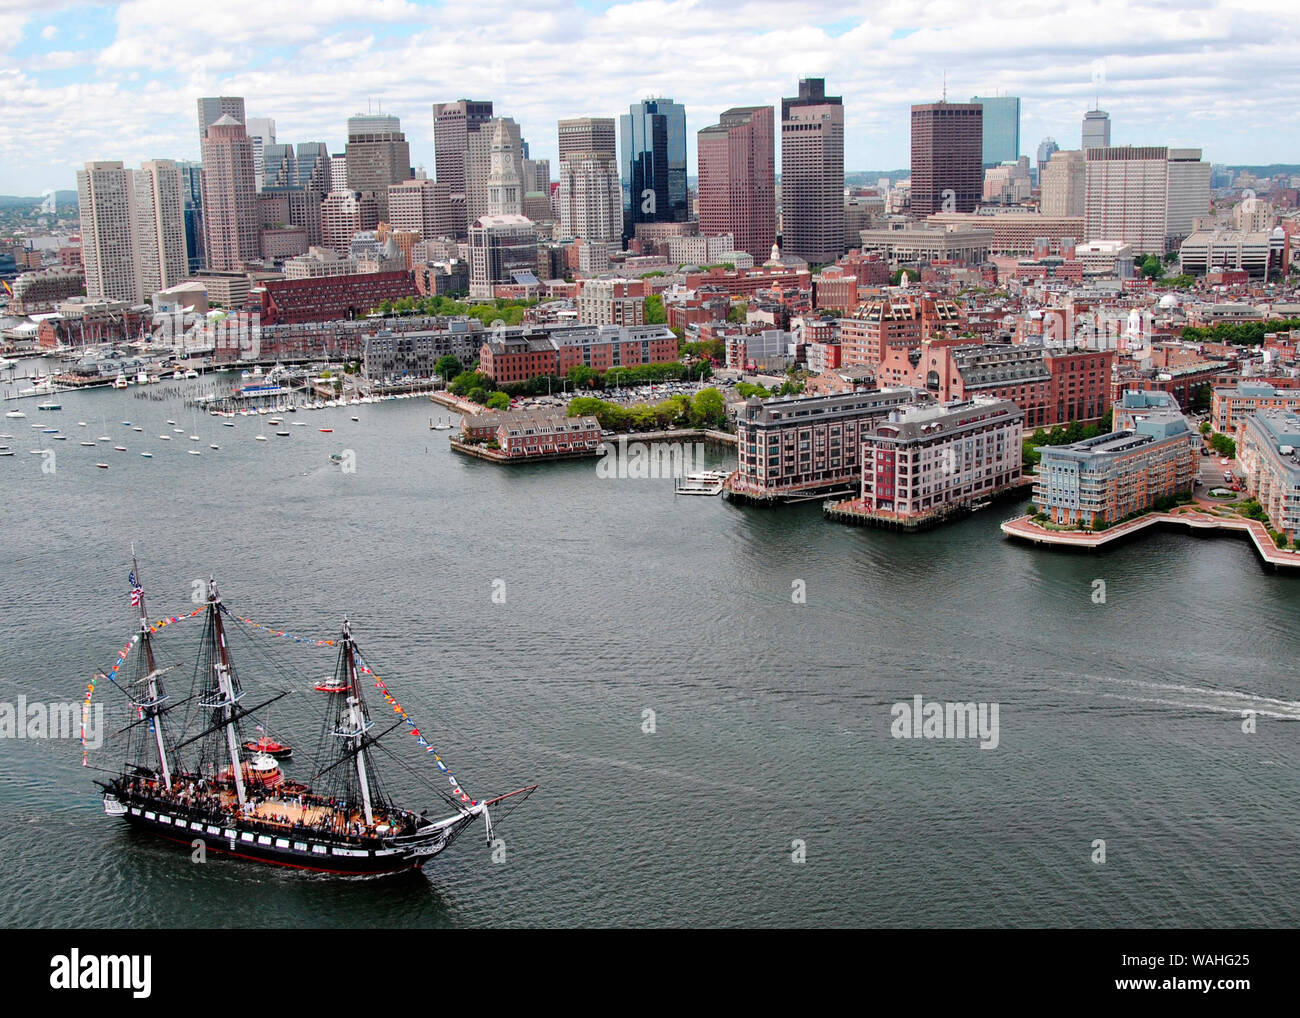 USS Constitution sails into Boston Harbor during an underway Battle of Midway commemoration. The underway honored approximately 200 members of Gold Star Families who lost loved ones in Operations Enduring and Iraqi Freedom and the Navy's victory at Midway Island in World War II. June 3, 2011 Stock Photo